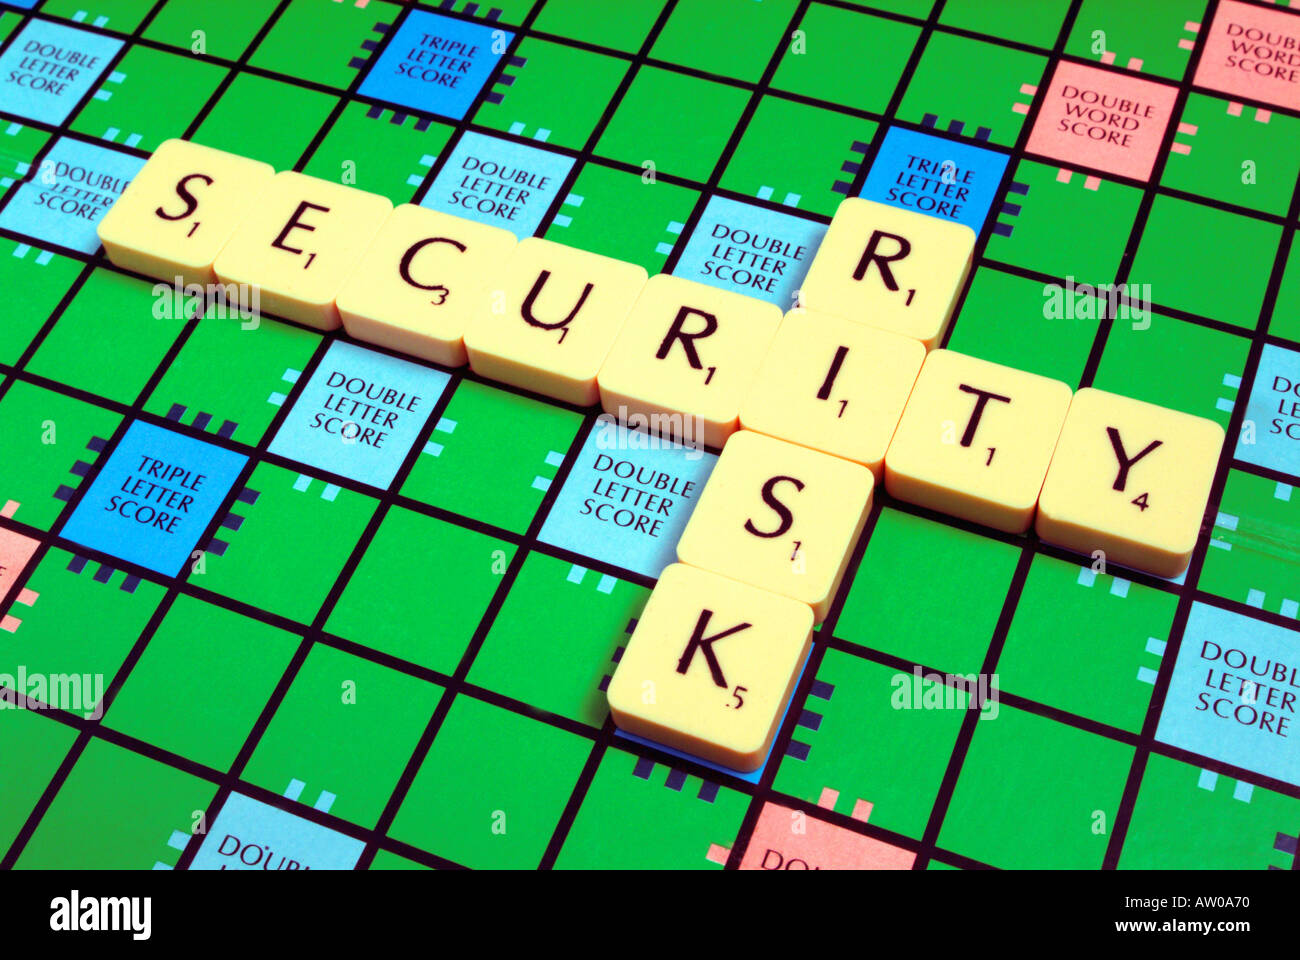 Scrabble pieces spelling out security risk Stock Photo